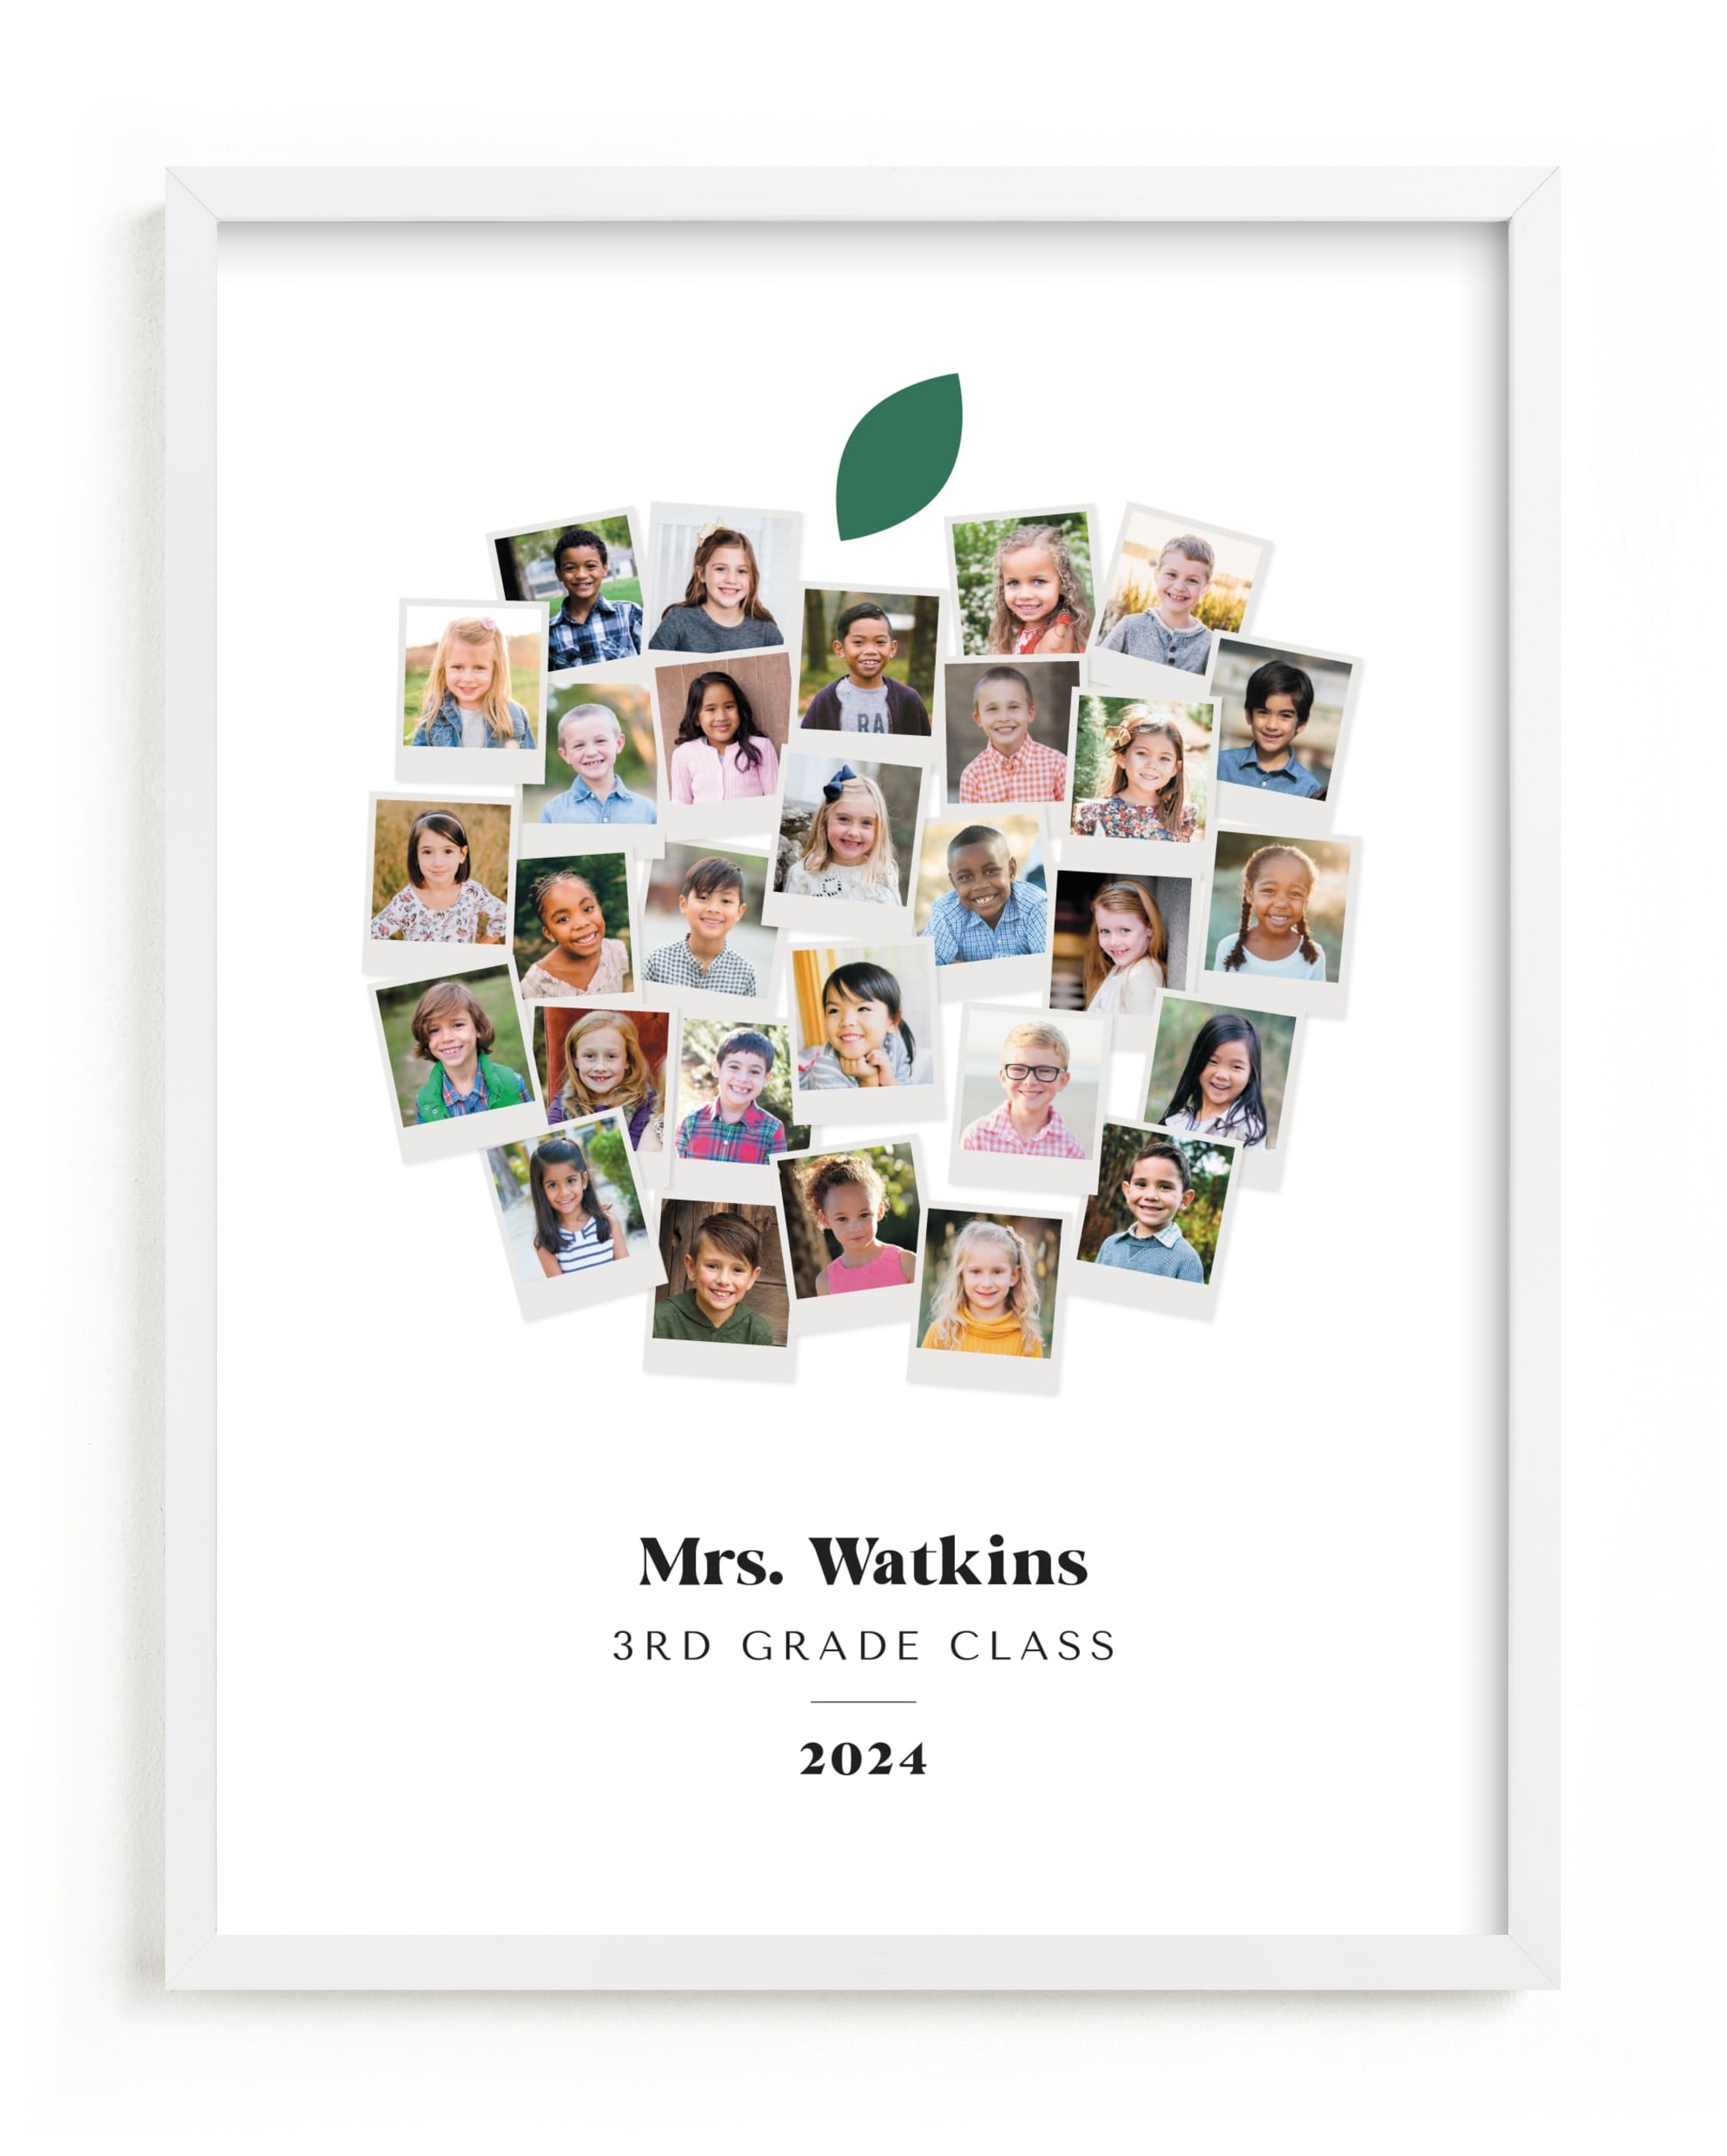 Apple for the Teacher, designed by Laura Bolter